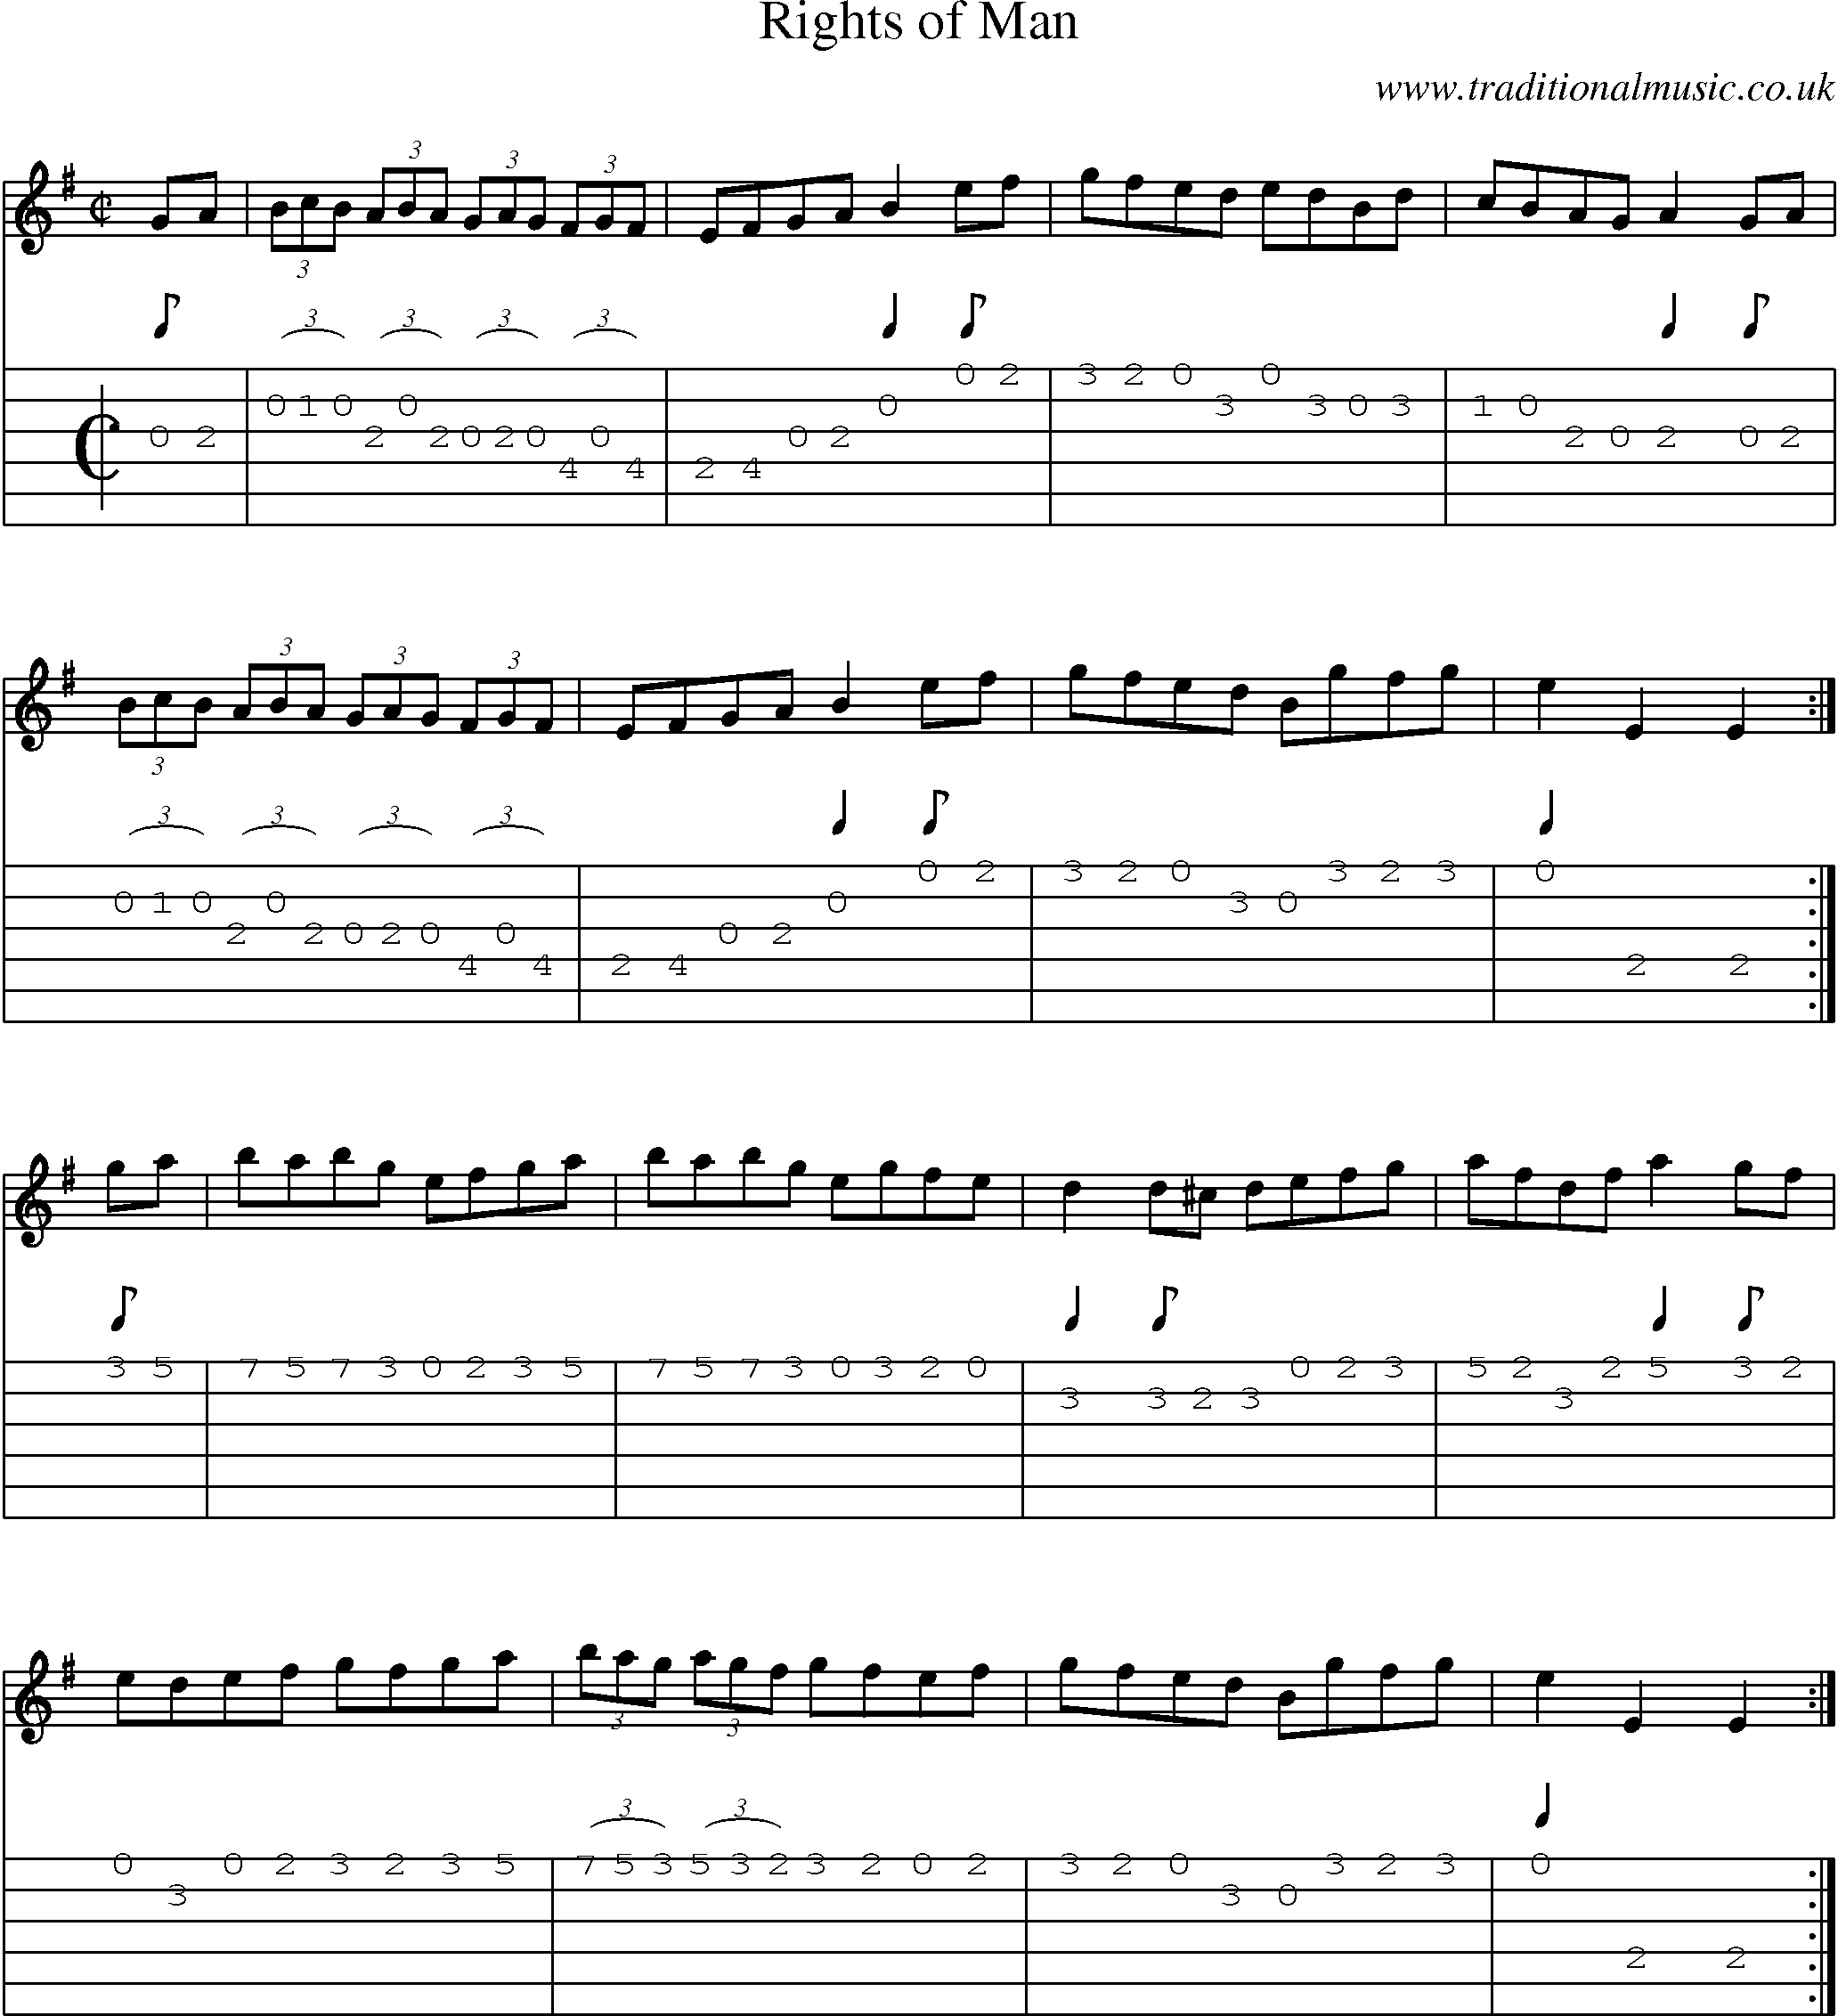 Music Score and Guitar Tabs for Rights Of Man